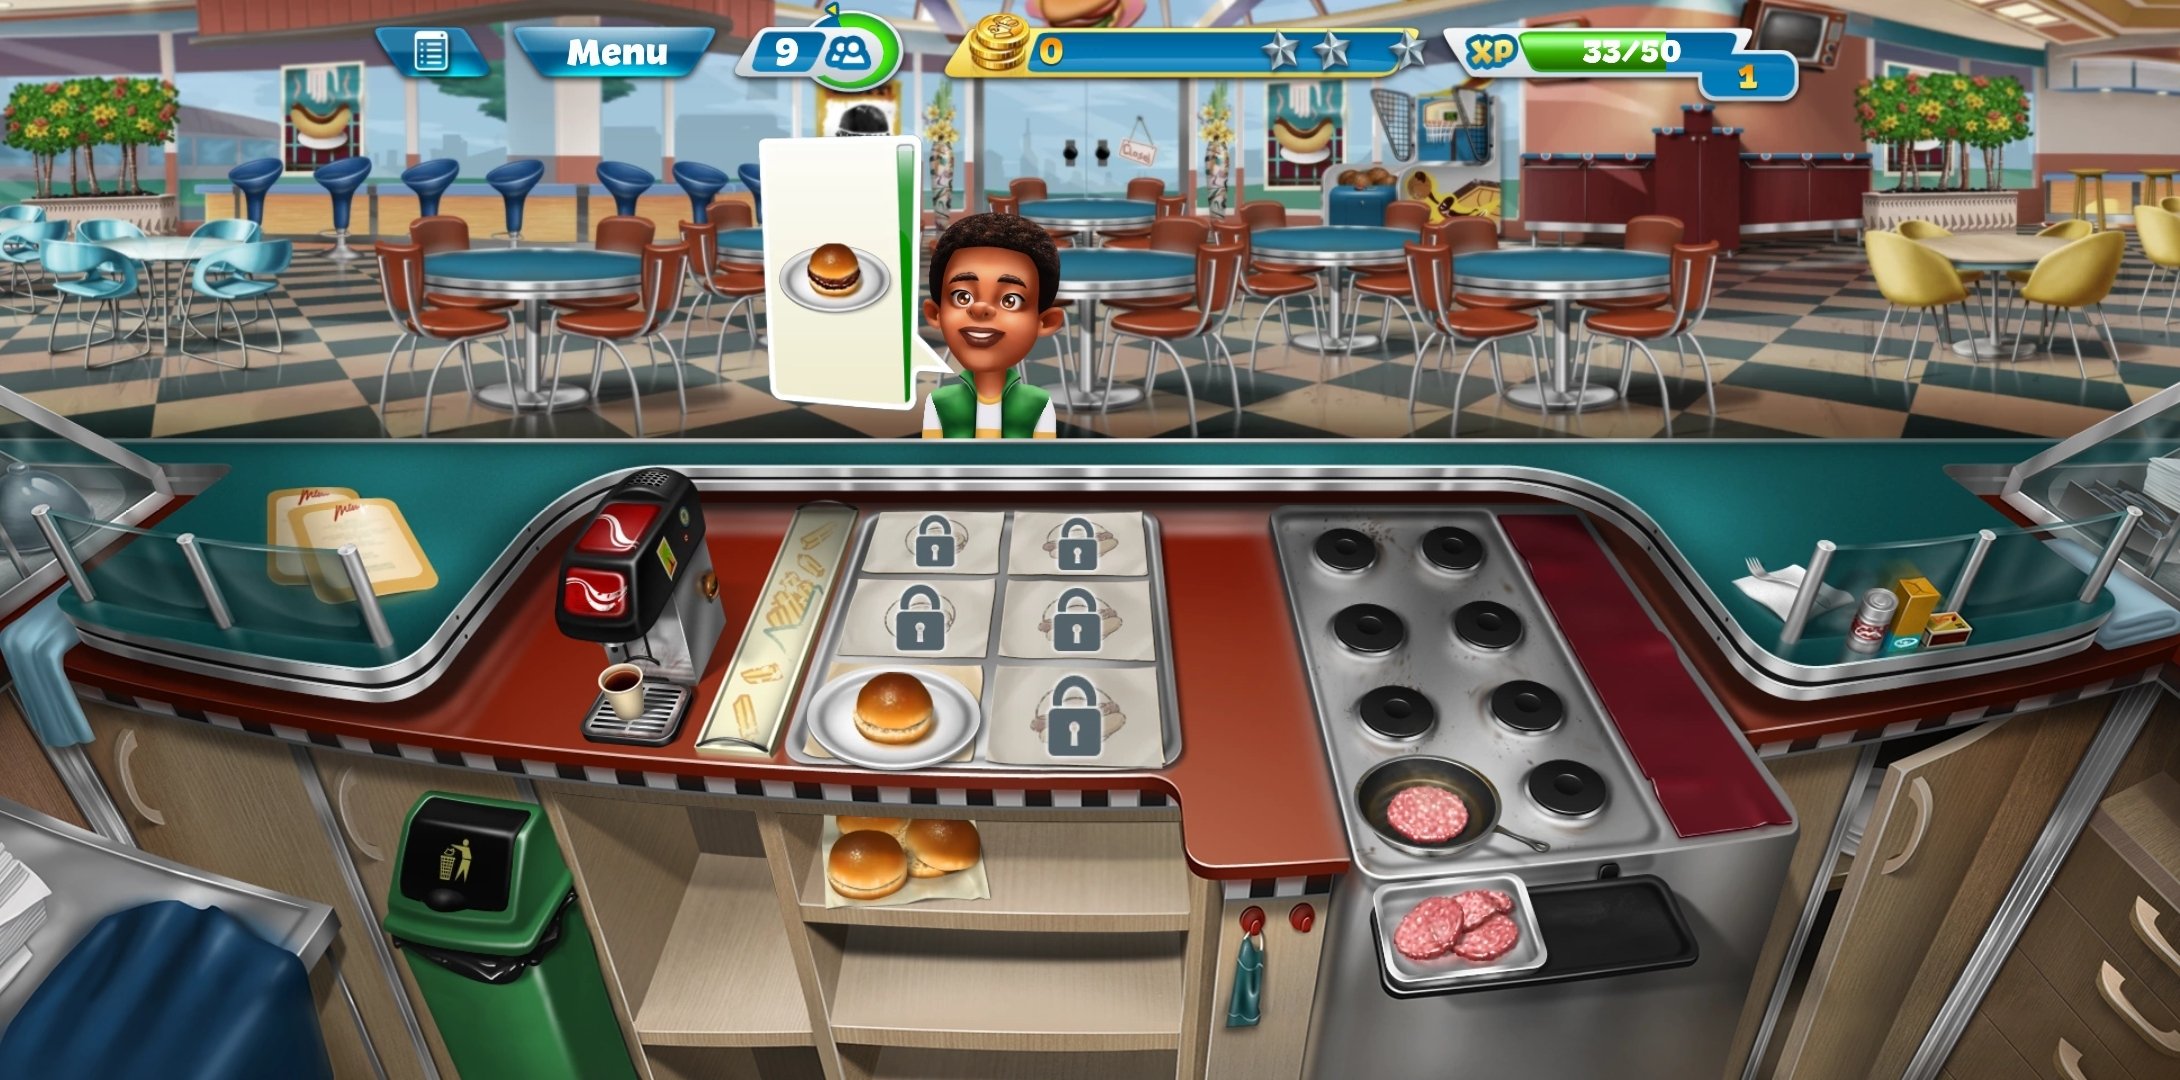 cooking fever game free download for pc windows 7